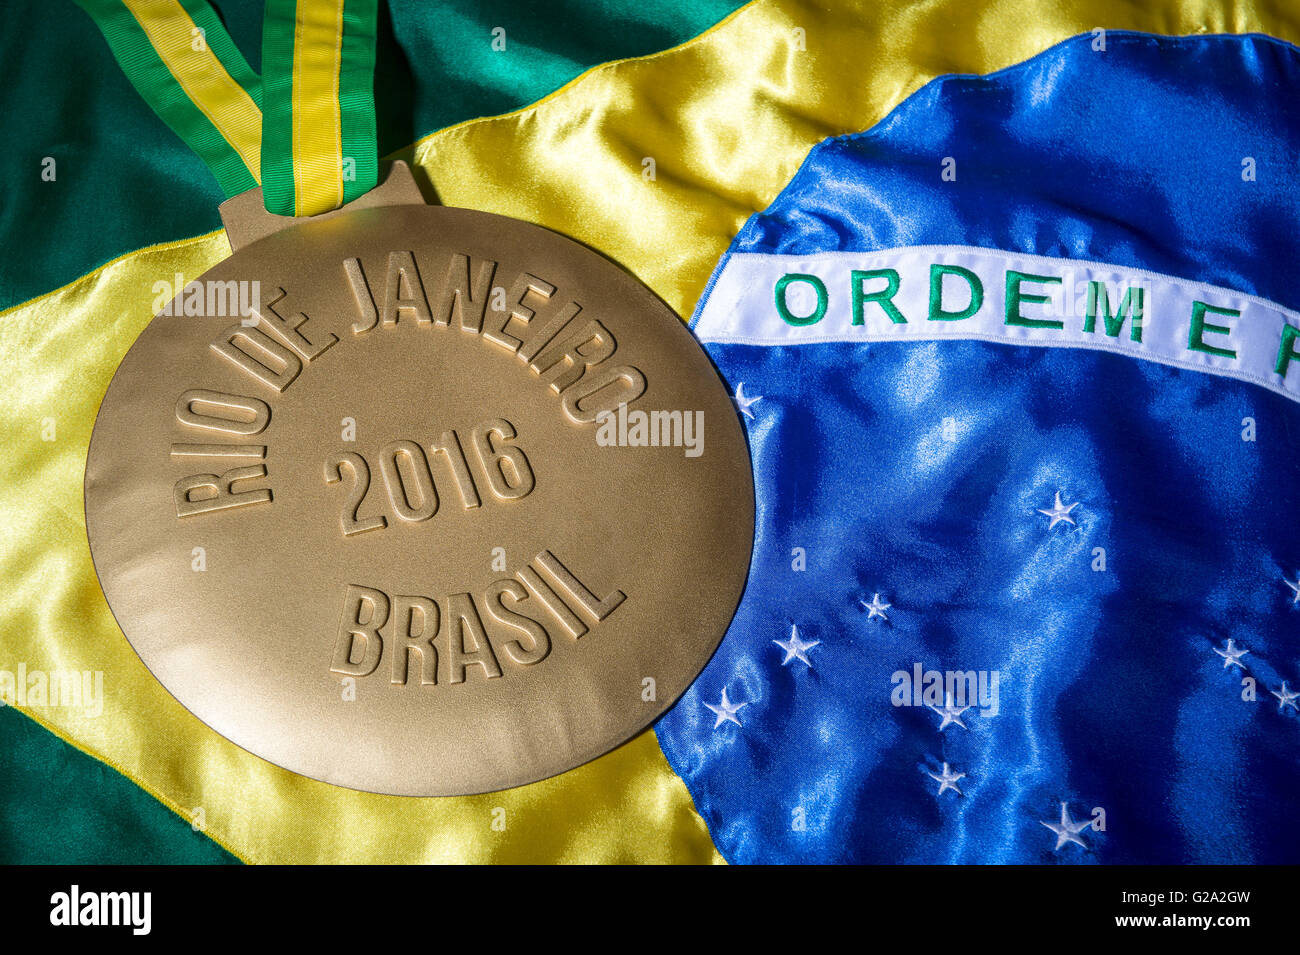 RIO DE JANEIRO - FEBRUARY 3, 2016: Large gold medal commemorating the 2016 Olympiad (Olympic Games) sits on Brazil flag. Stock Photo